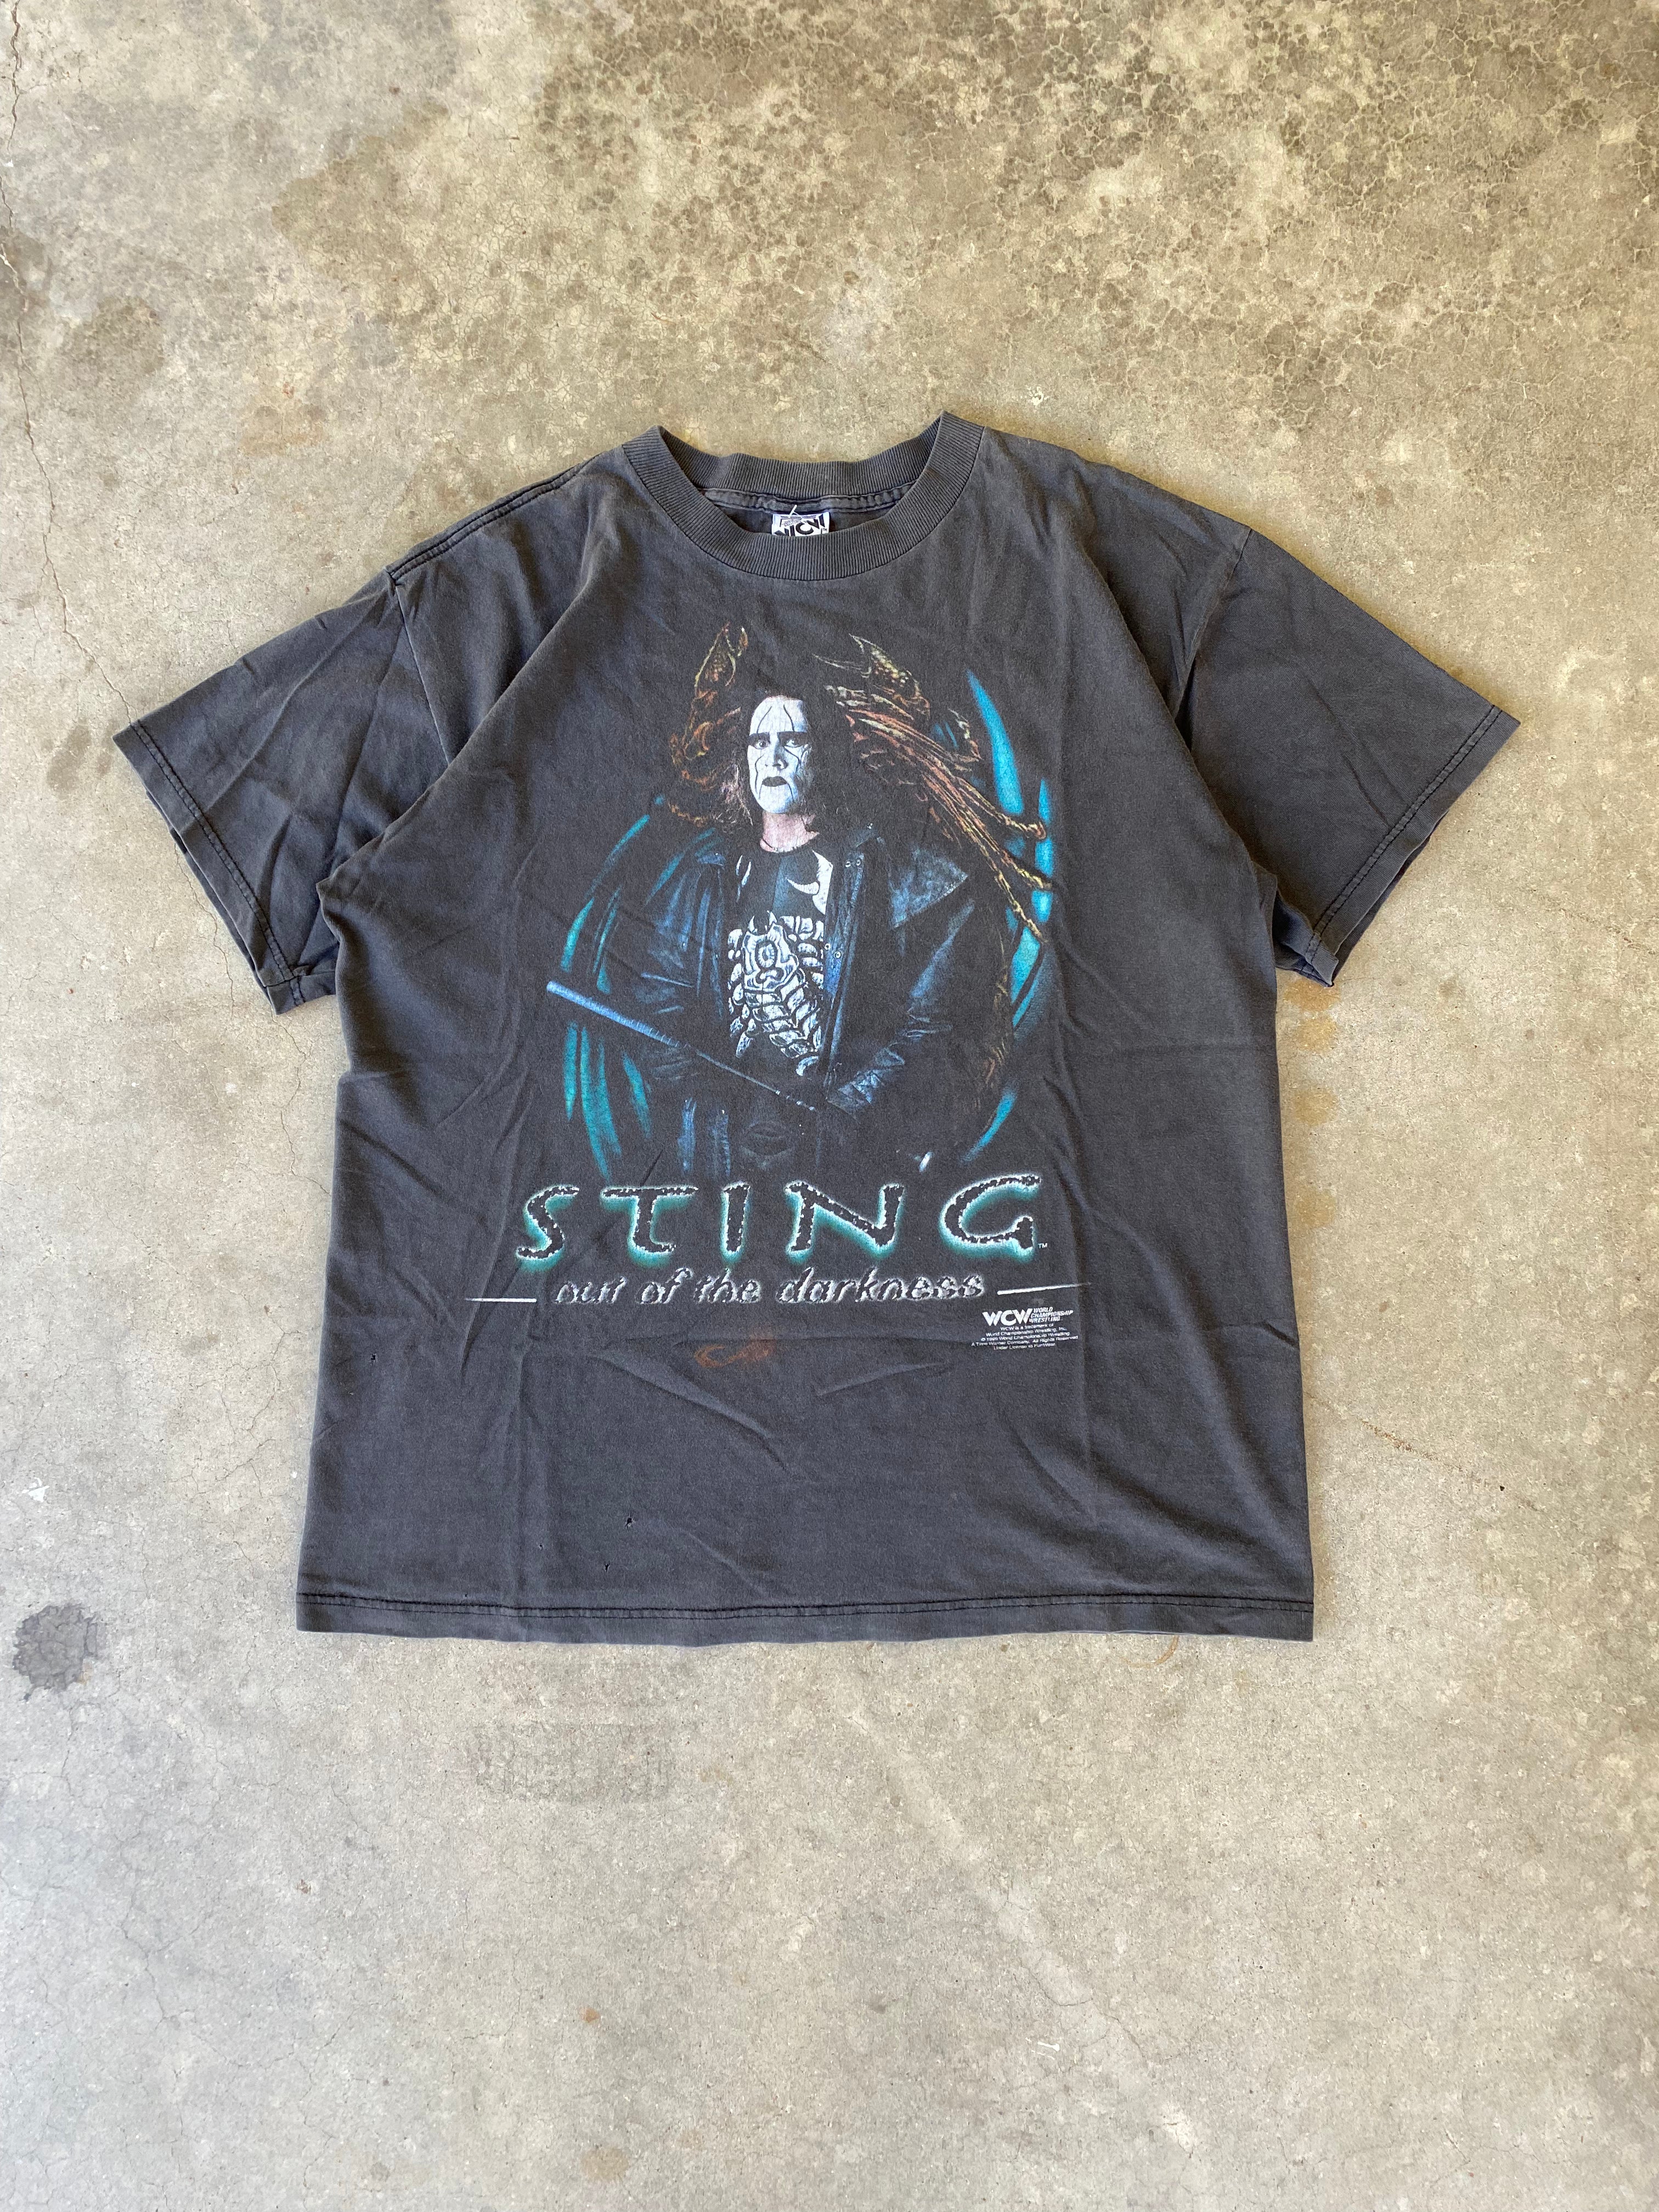 1999 Sting “Out of the Darkness” Faded T-Shirt